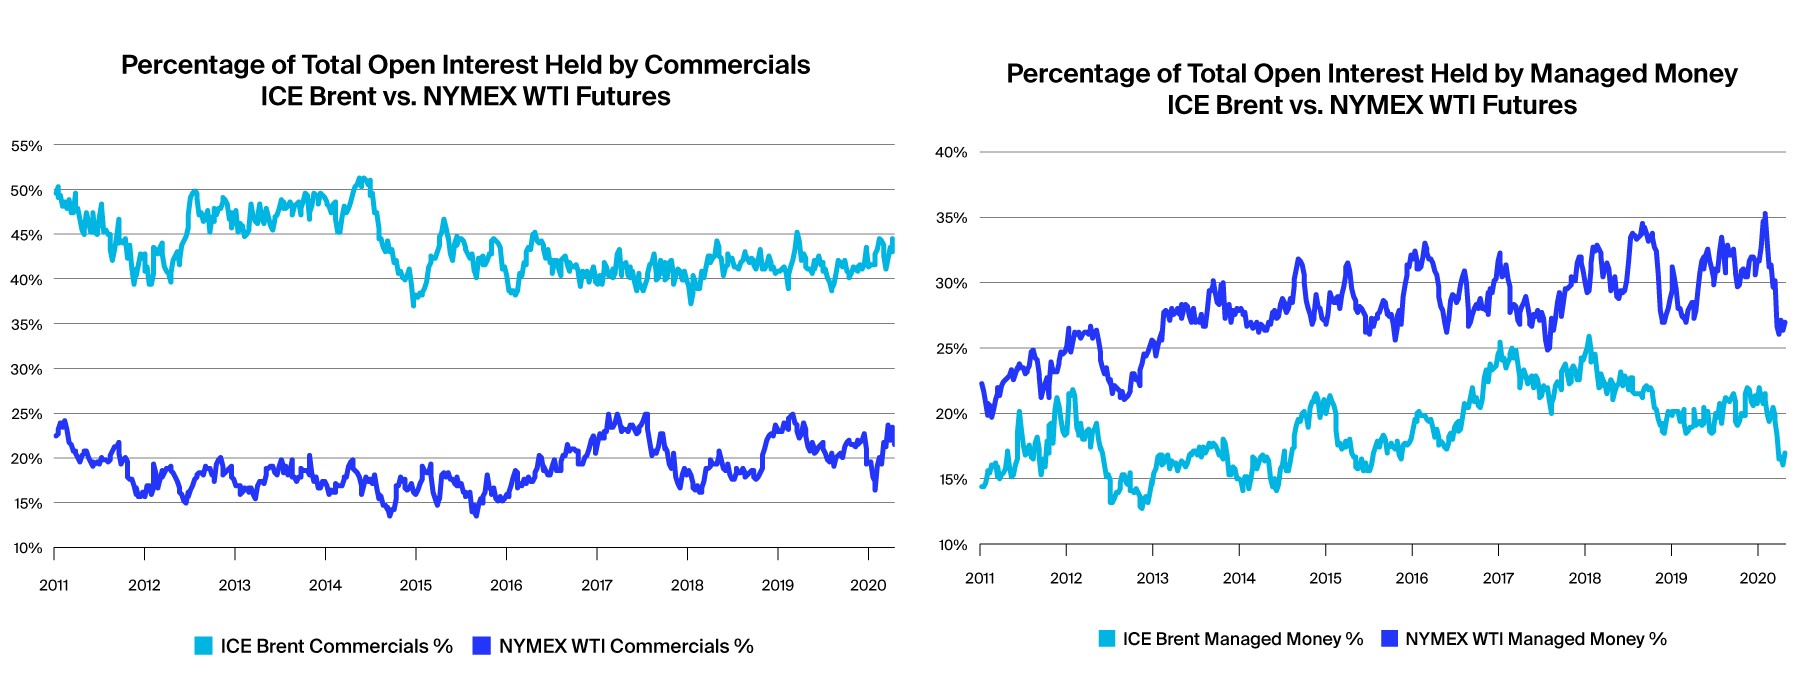 2 charts: left, Percentage of Total Open Interest Held by Commercials ICE Brent vs. NYMEX WTI Futures; right, Percentage of Total Open Interest Held by Managed MOney ICE Brent vs. NYMEX WTI Futures